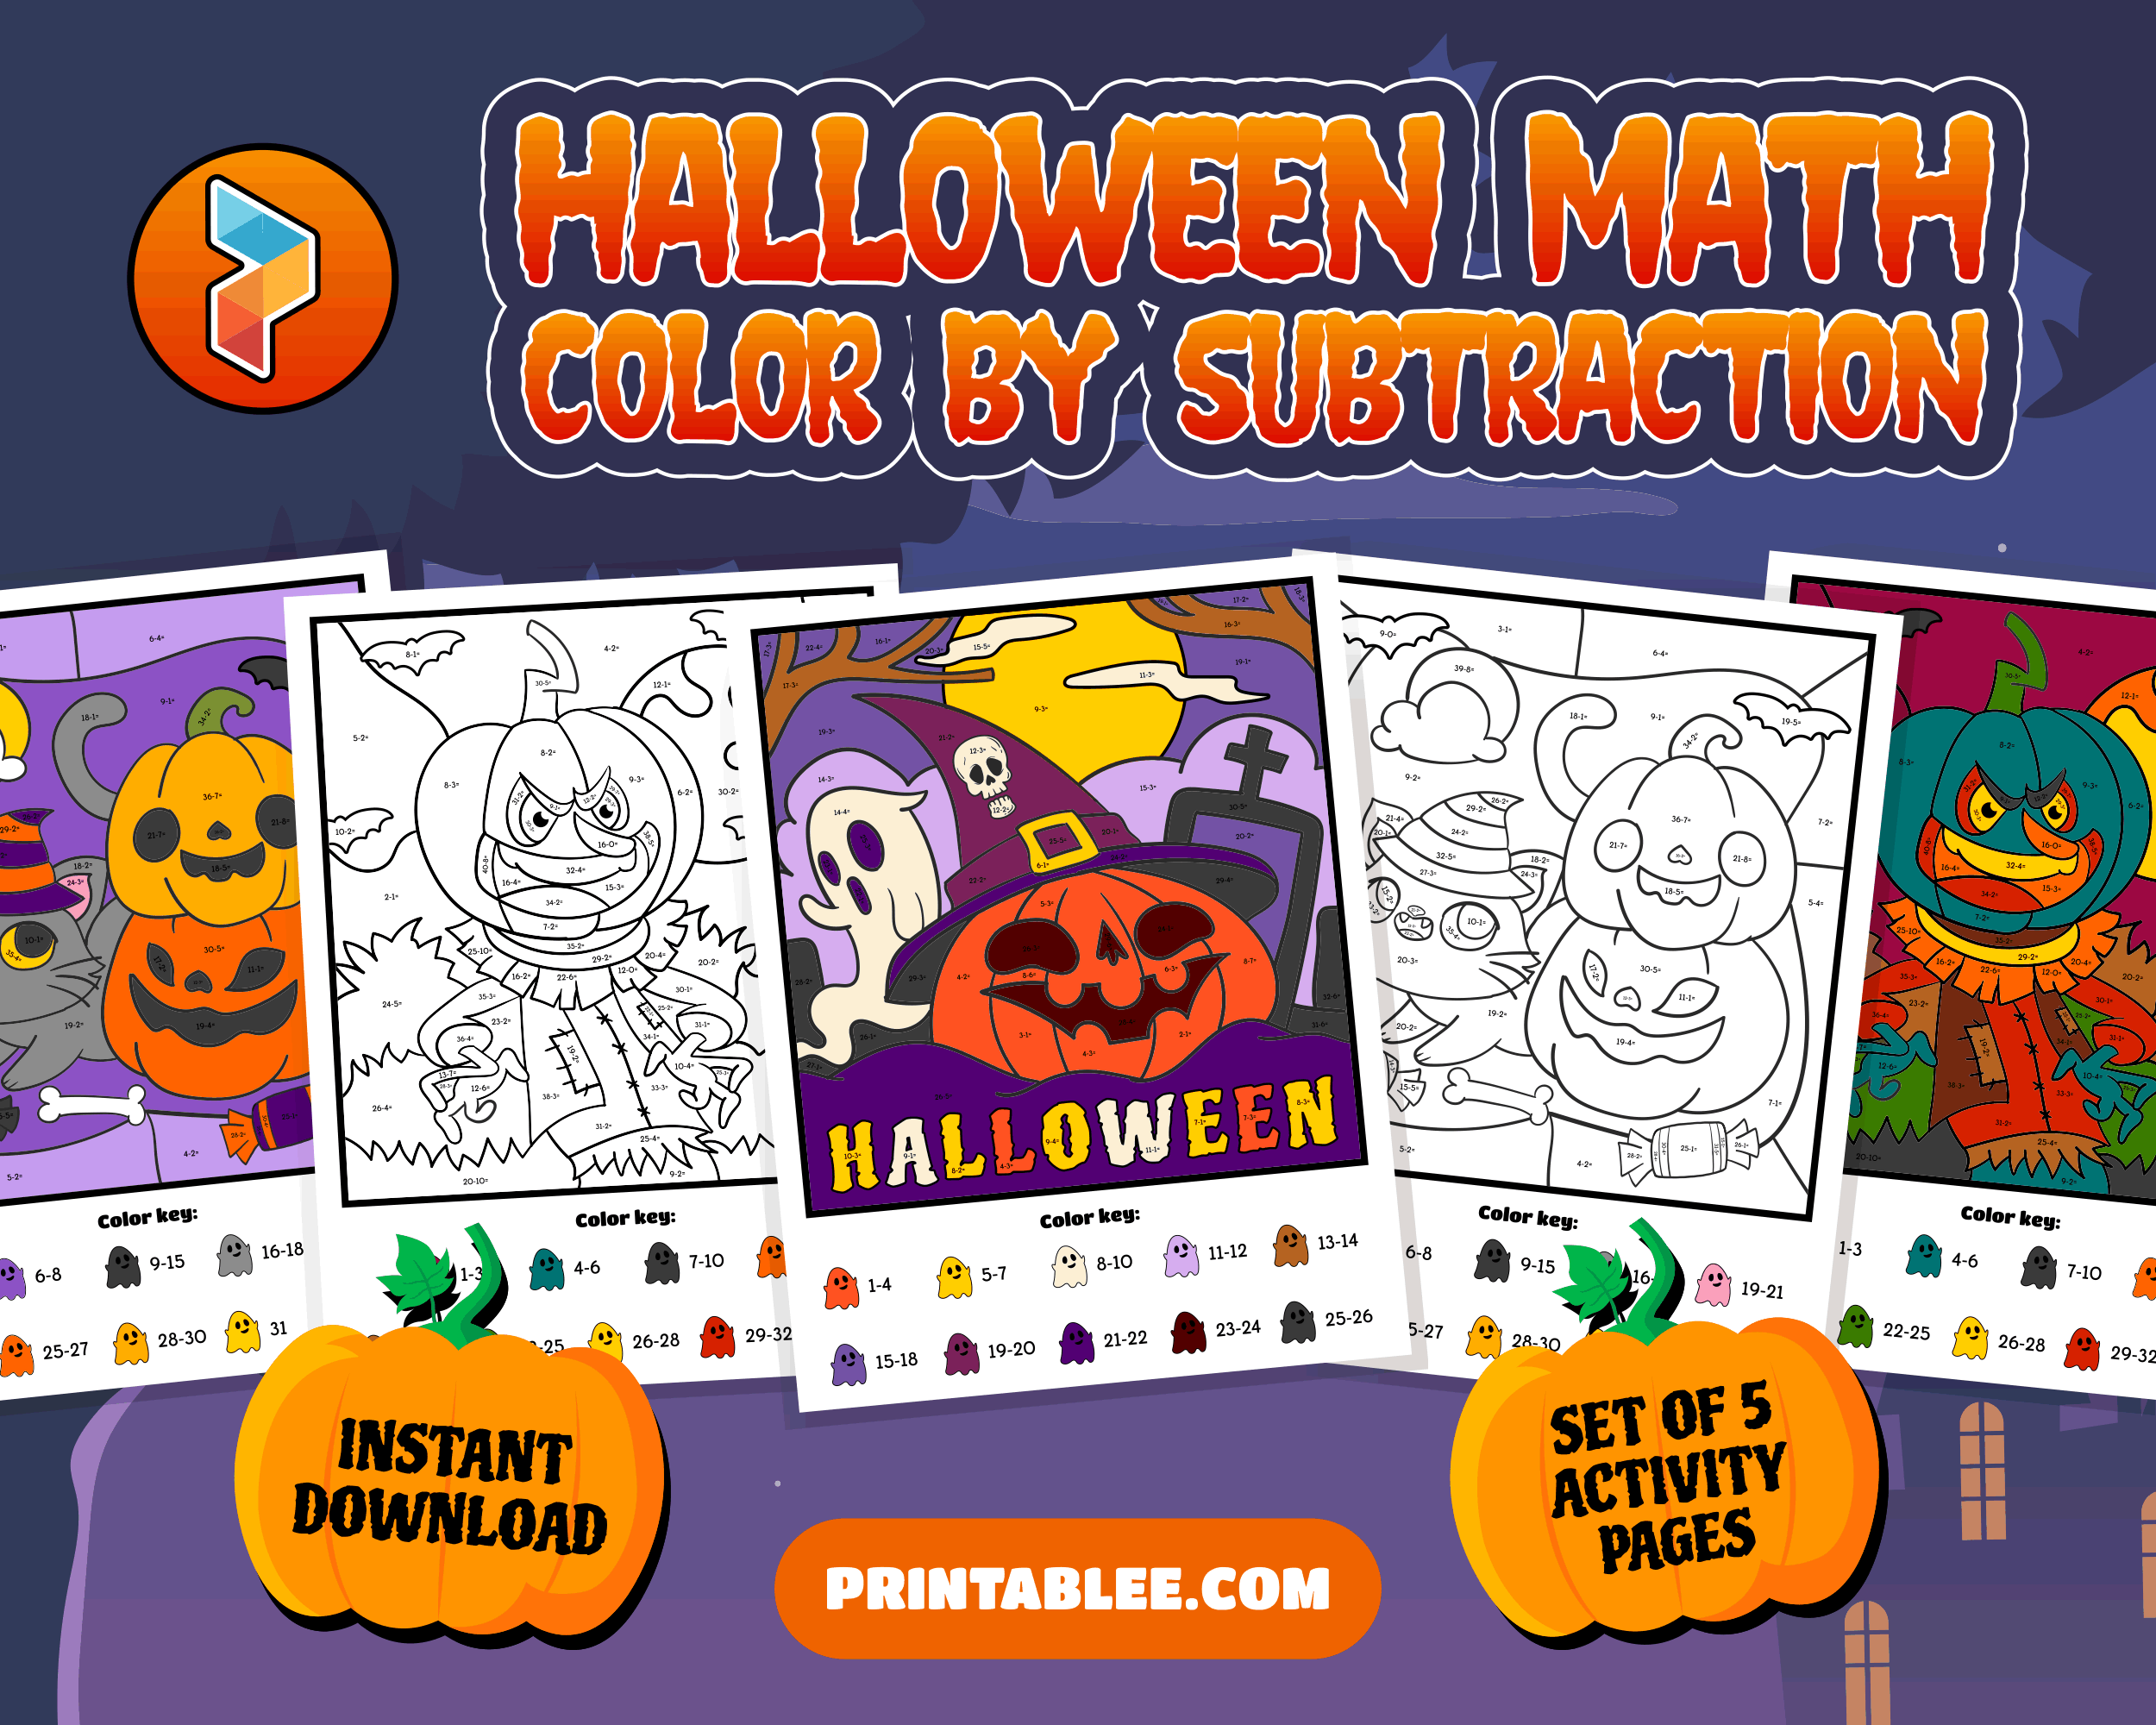 Printable Halloween Coloring for Kids Fun Math - Color by Number Subtraction Practice | Halloween Math Color by Subtraction